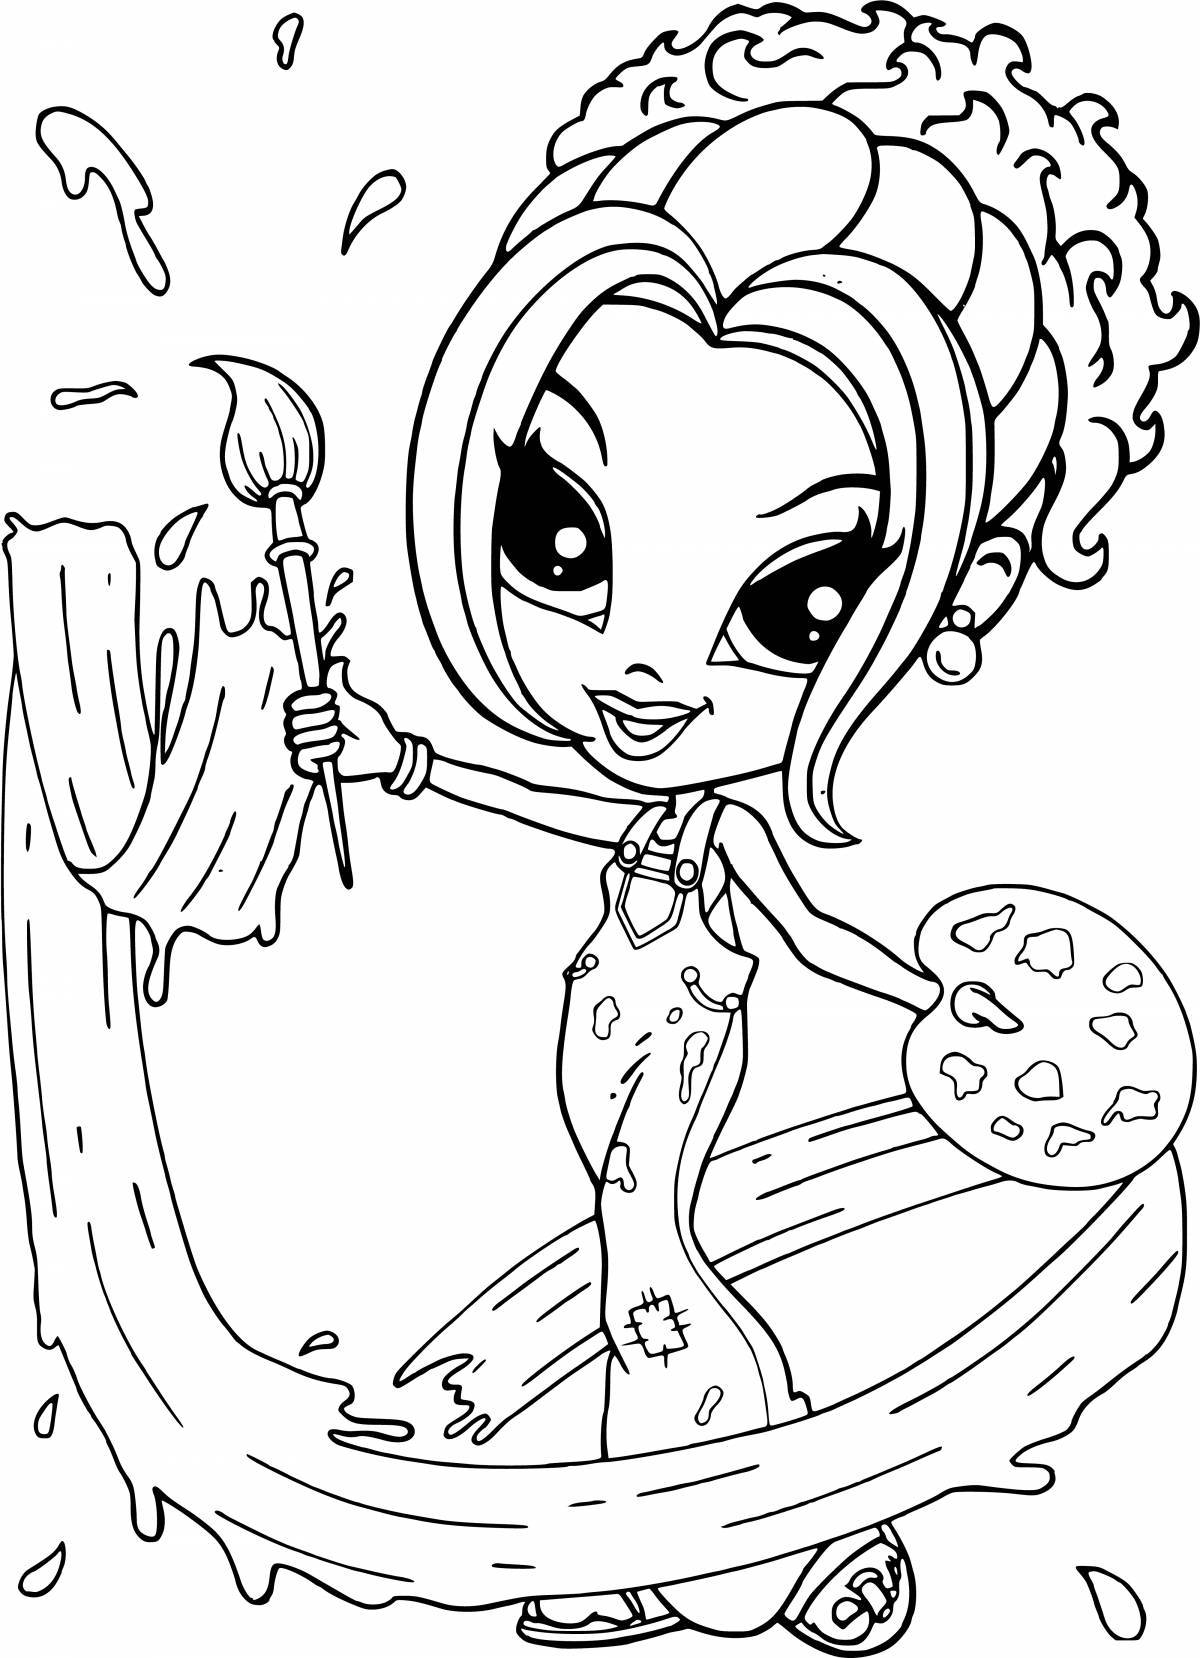 Coloring for girls #5